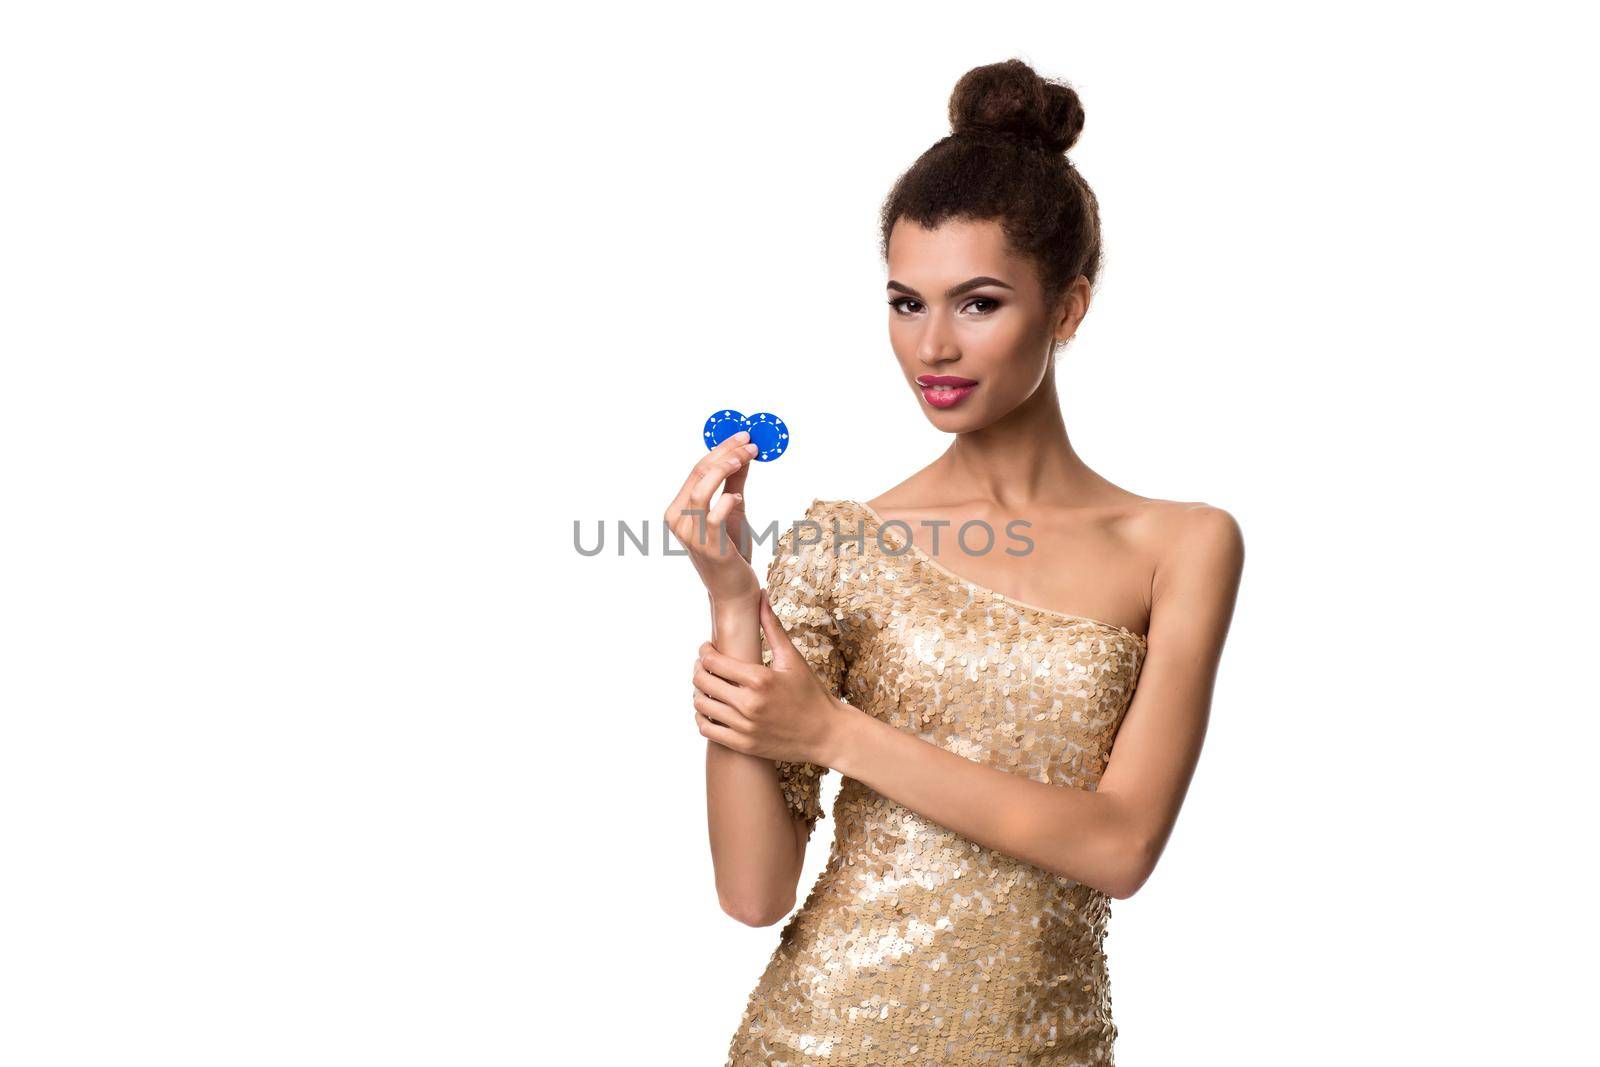 Smiling young woman holding two chips in her hands. Woman in gold dress is isolated on white background